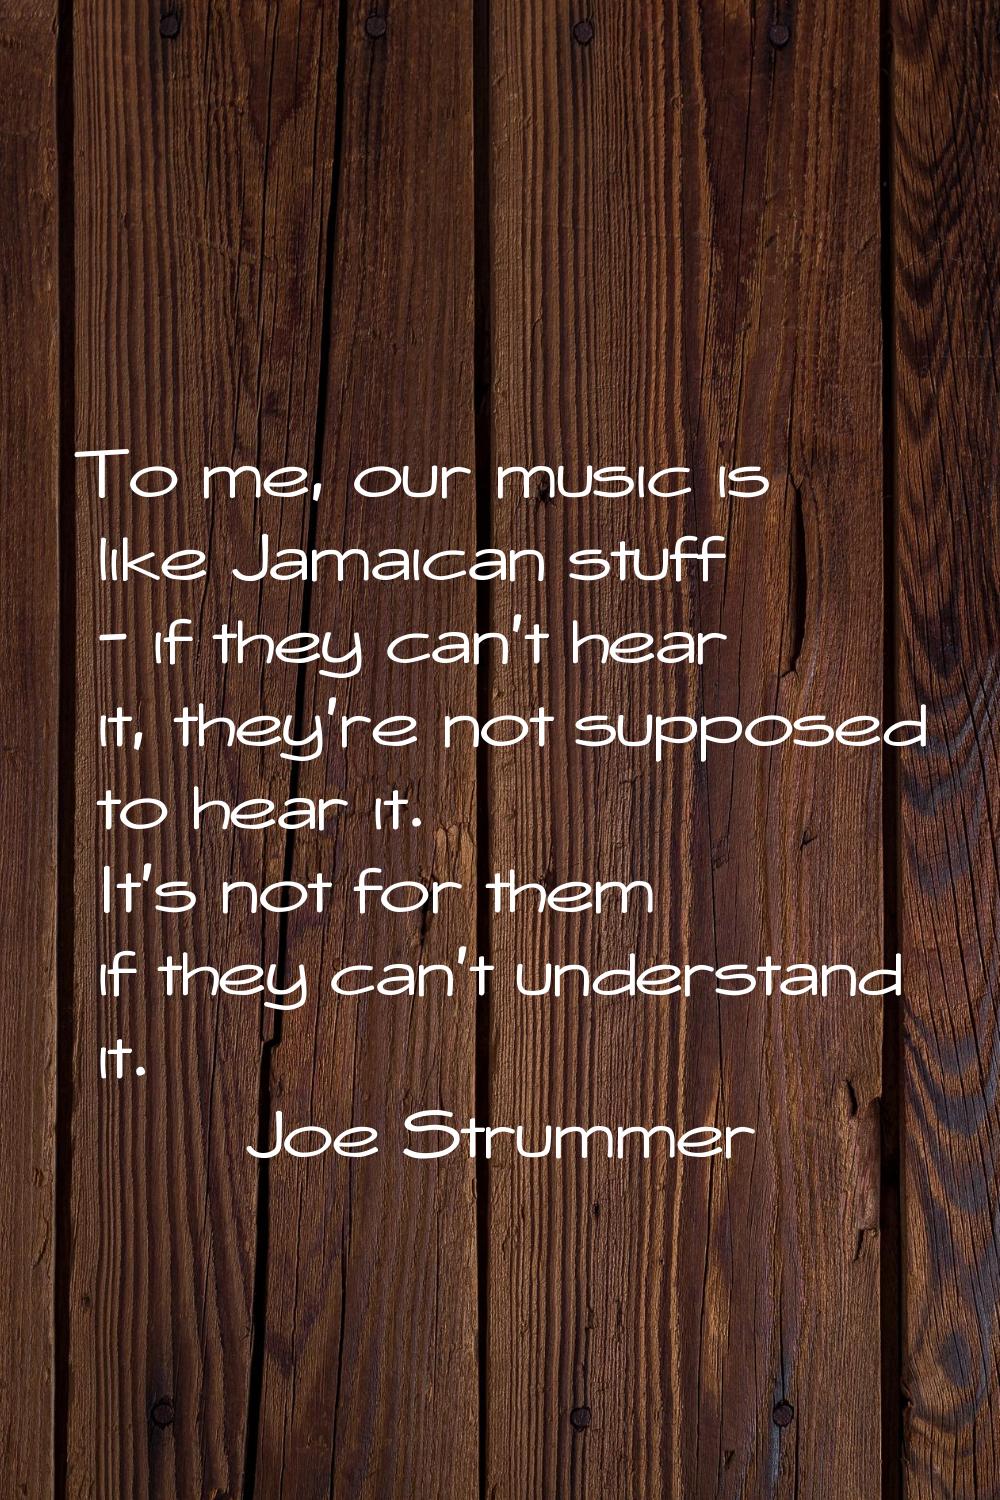 To me, our music is like Jamaican stuff - if they can't hear it, they're not supposed to hear it. I